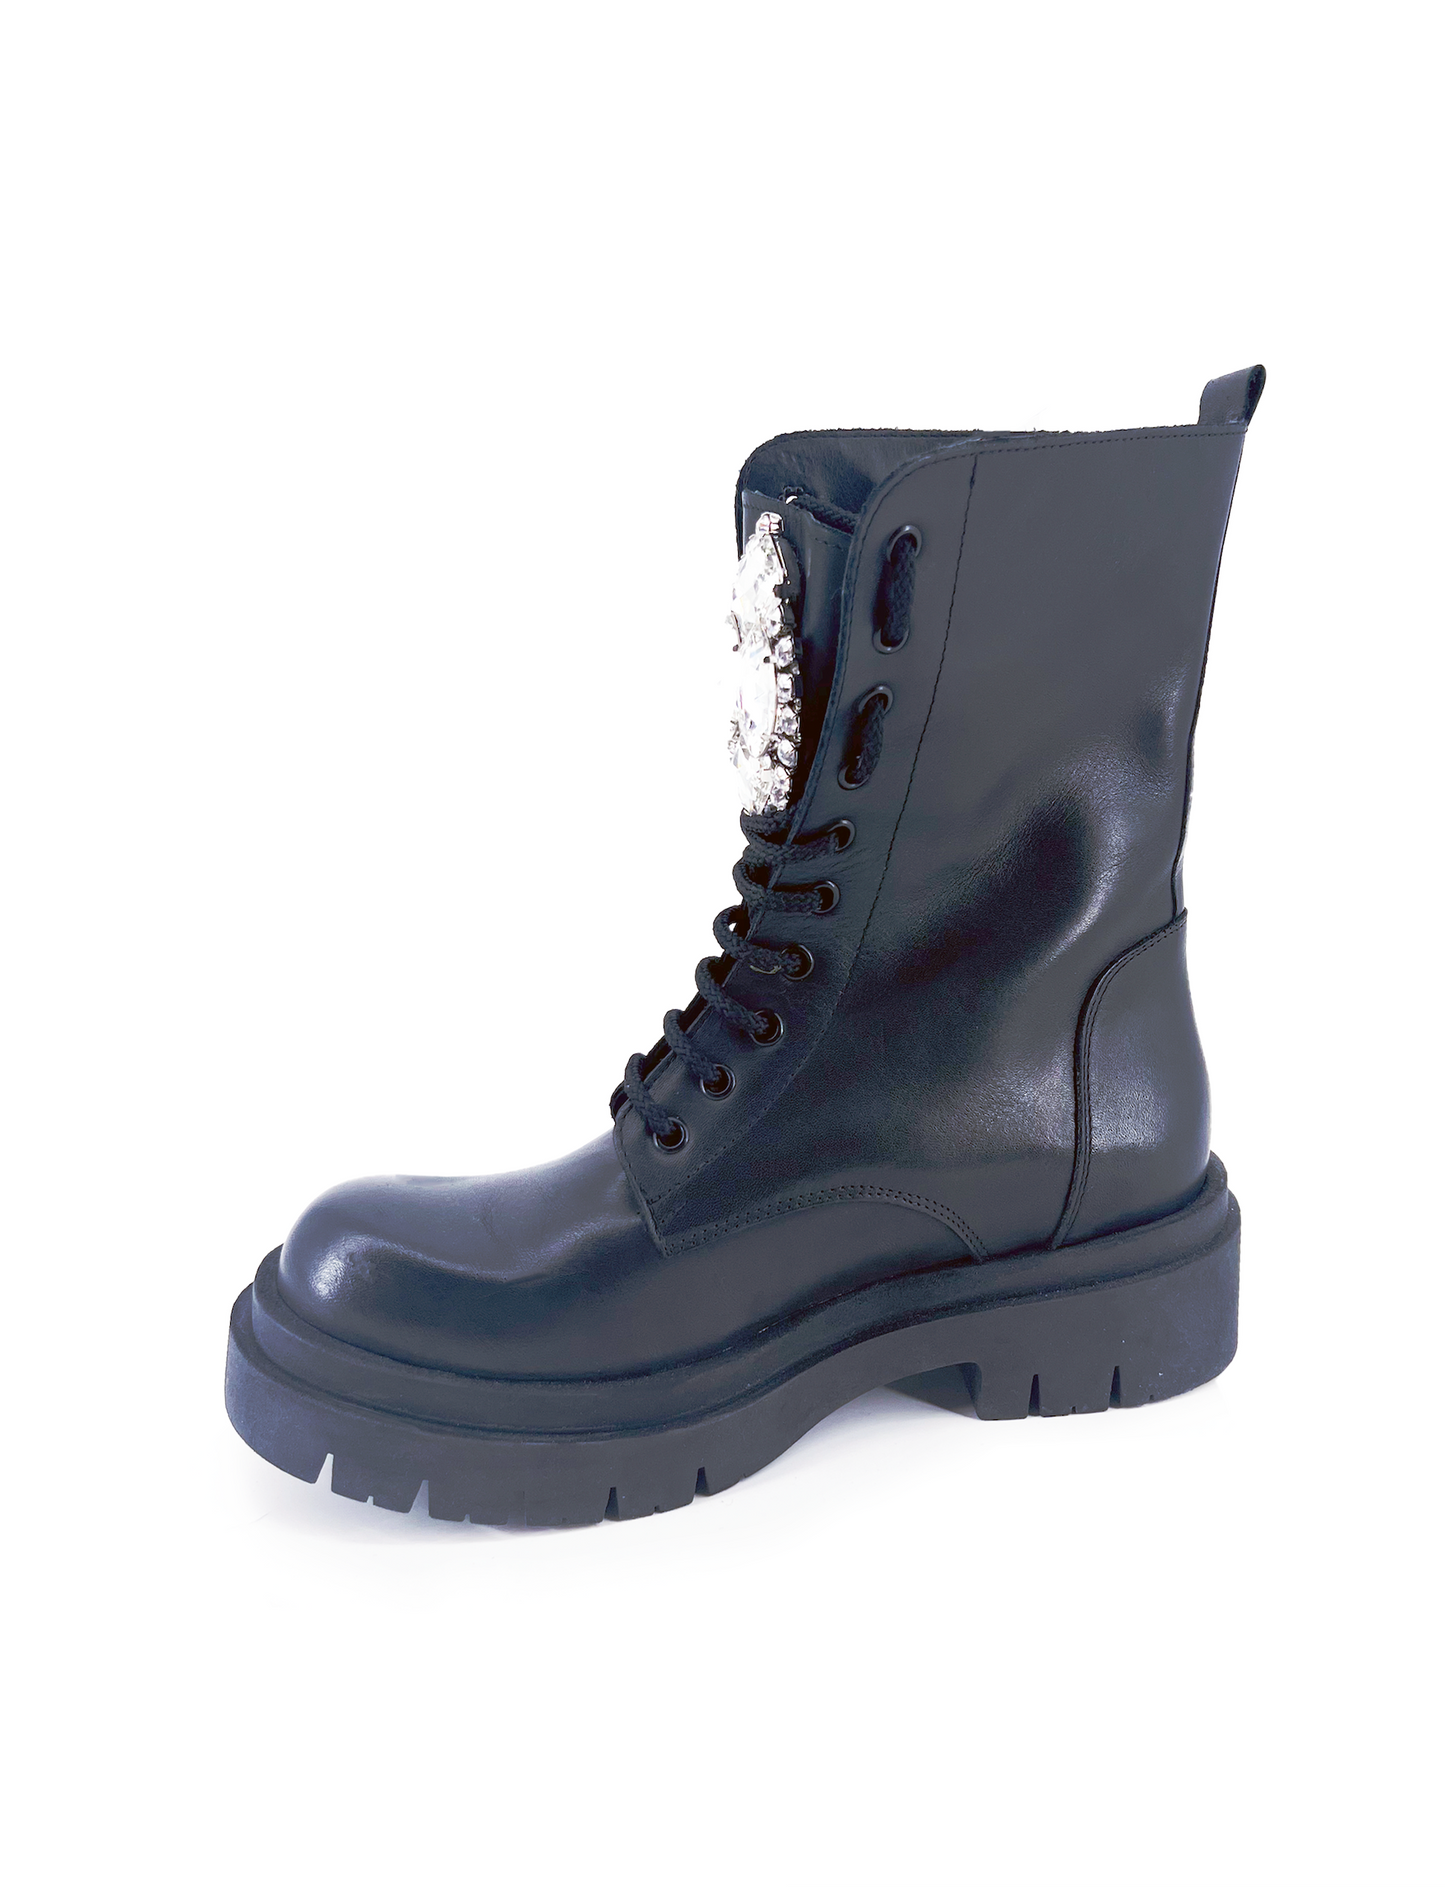 THE ROYAL COURT COMBAT BOOT